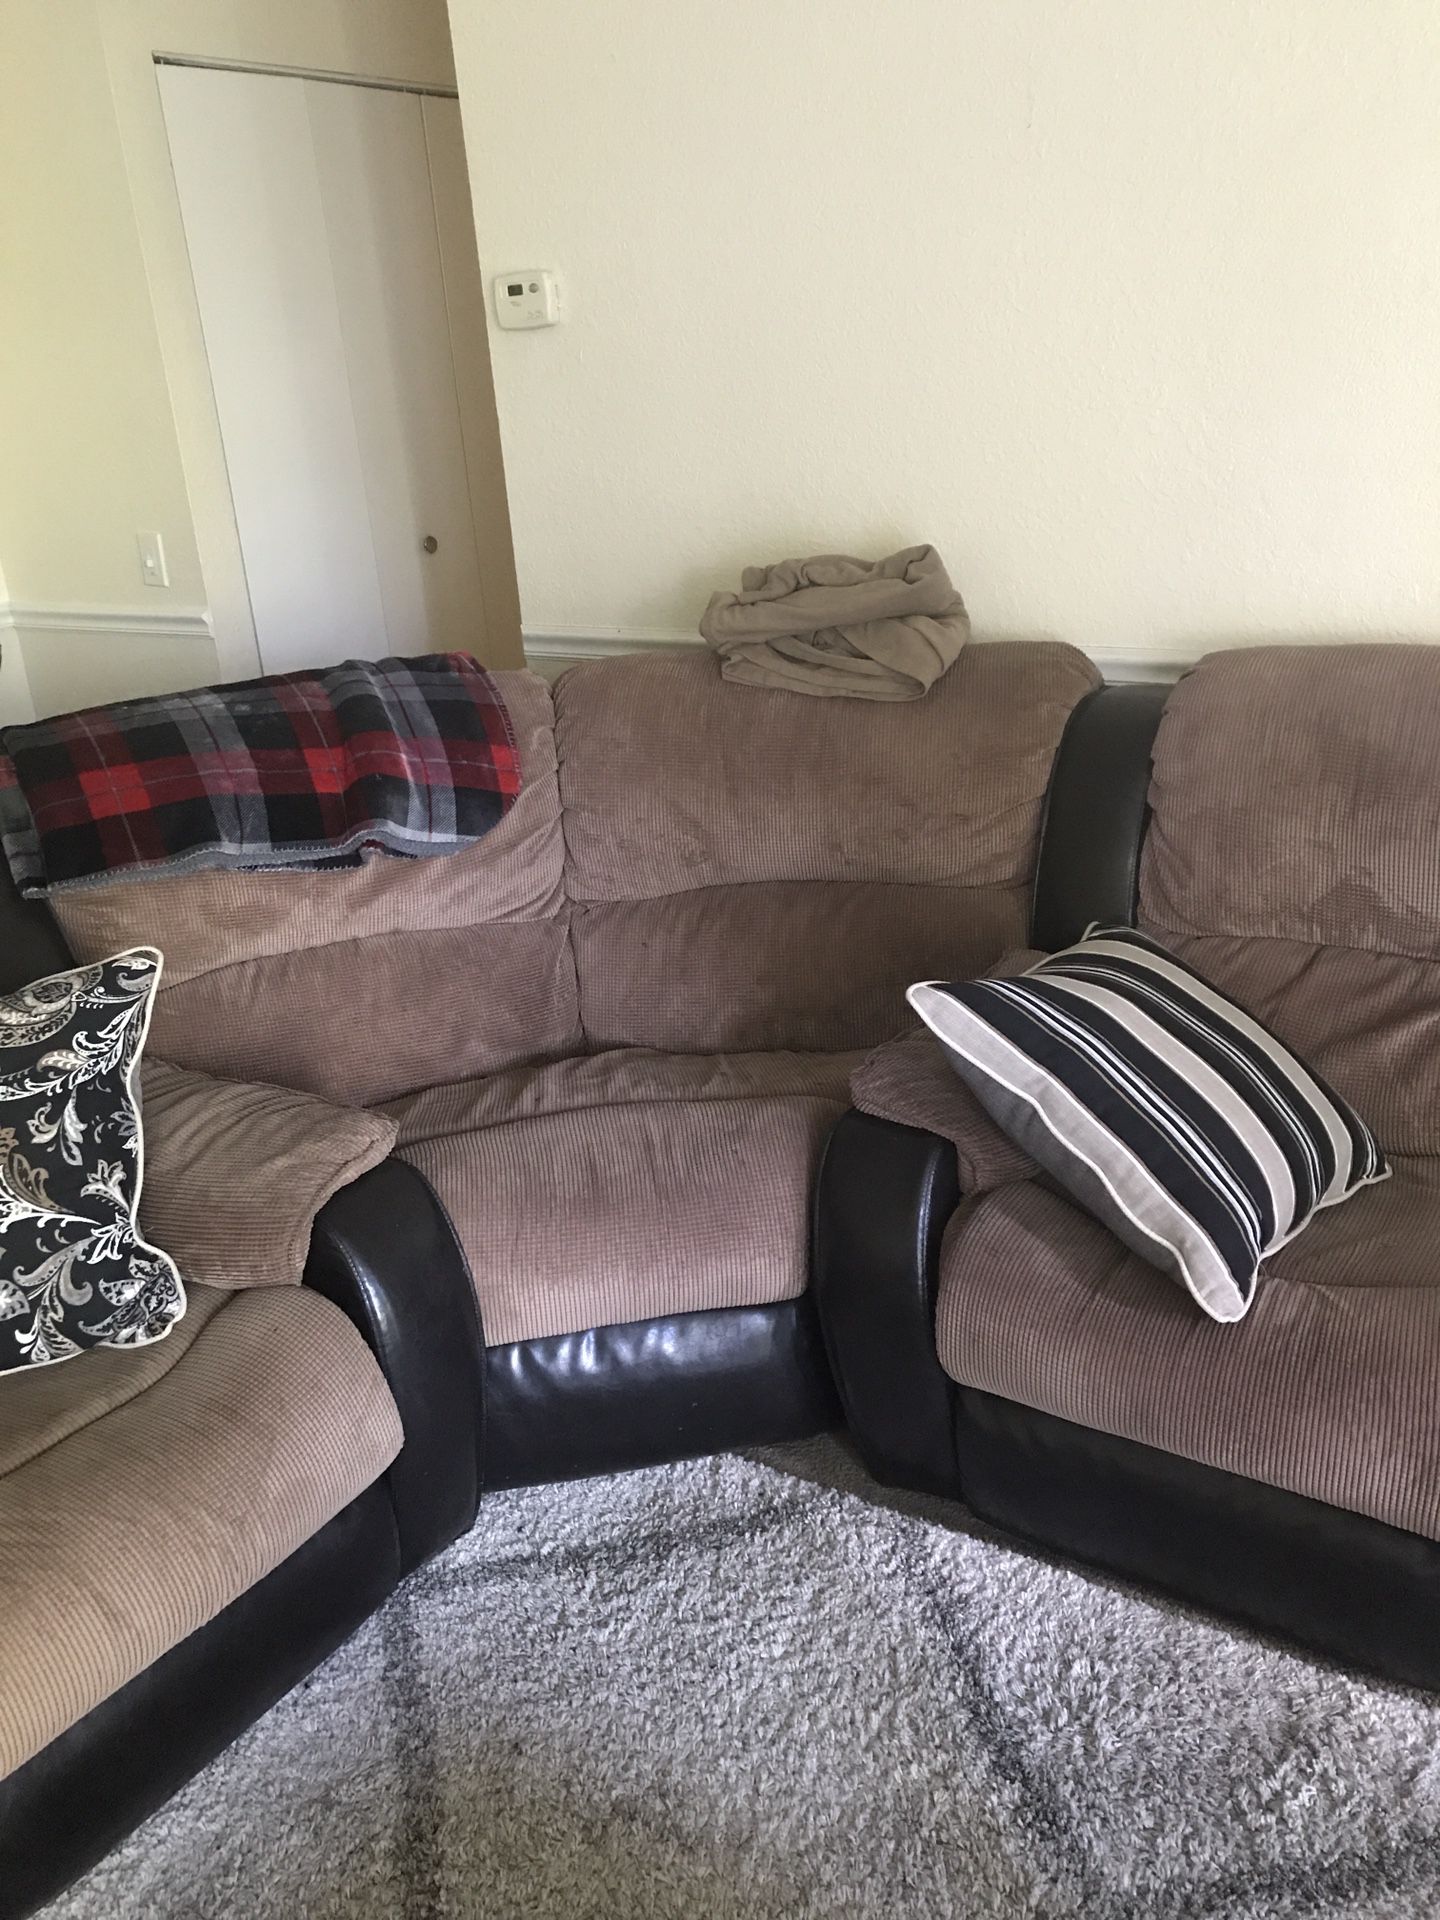 4 recliner couch , kitchen table and coffee table